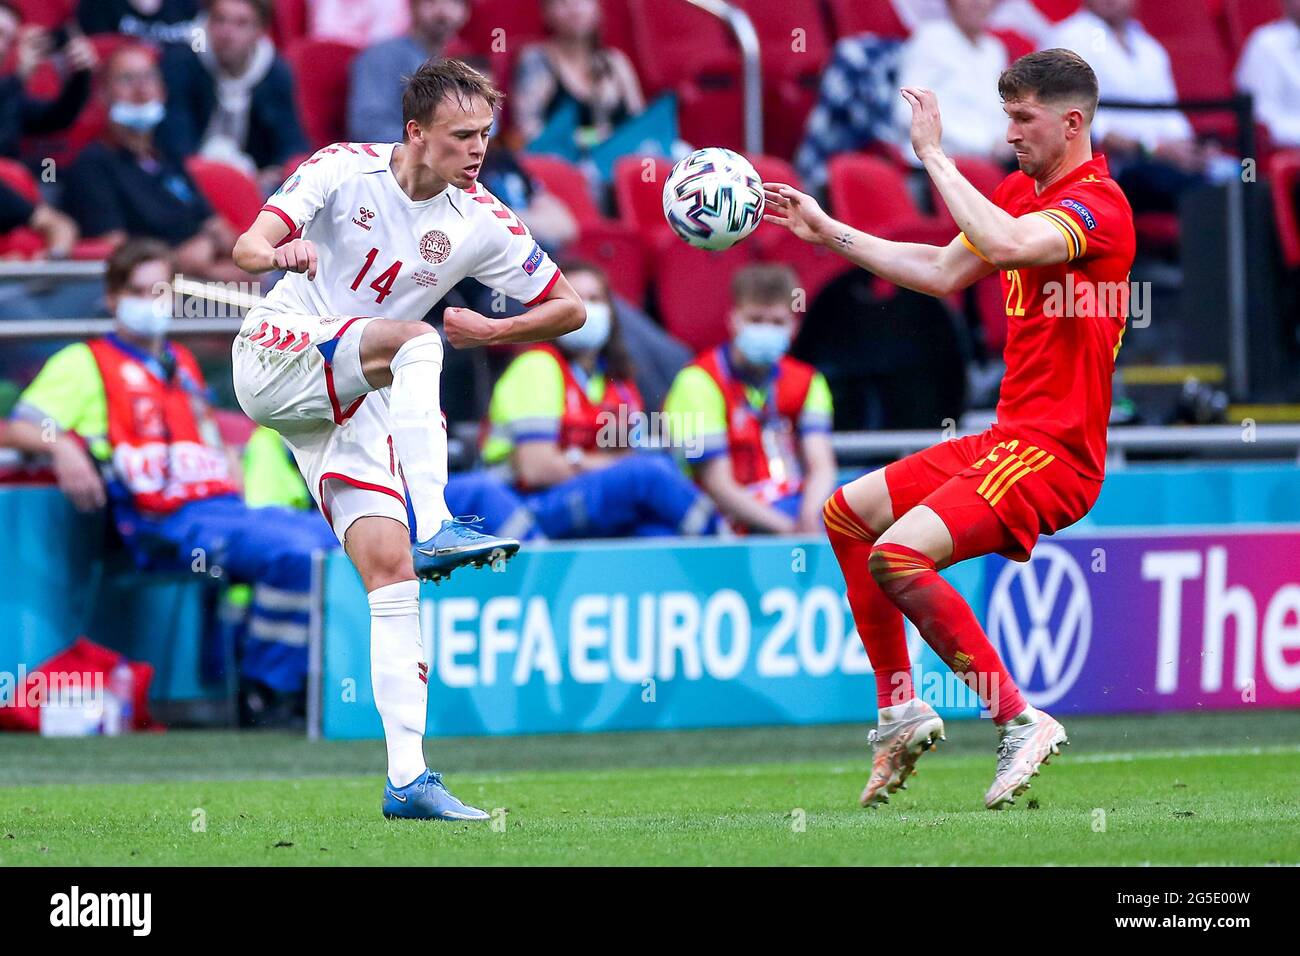 Denmark's Mikkel Damsgaard (left) and Wales' Chris Mepham battle for the ball during the UEFA Euro 2020 round of 16 match held at the Johan Cruijff ArenA in Amsterdam, Netherlands. Picture date: Saturday June 26, 2021. Stock Photo